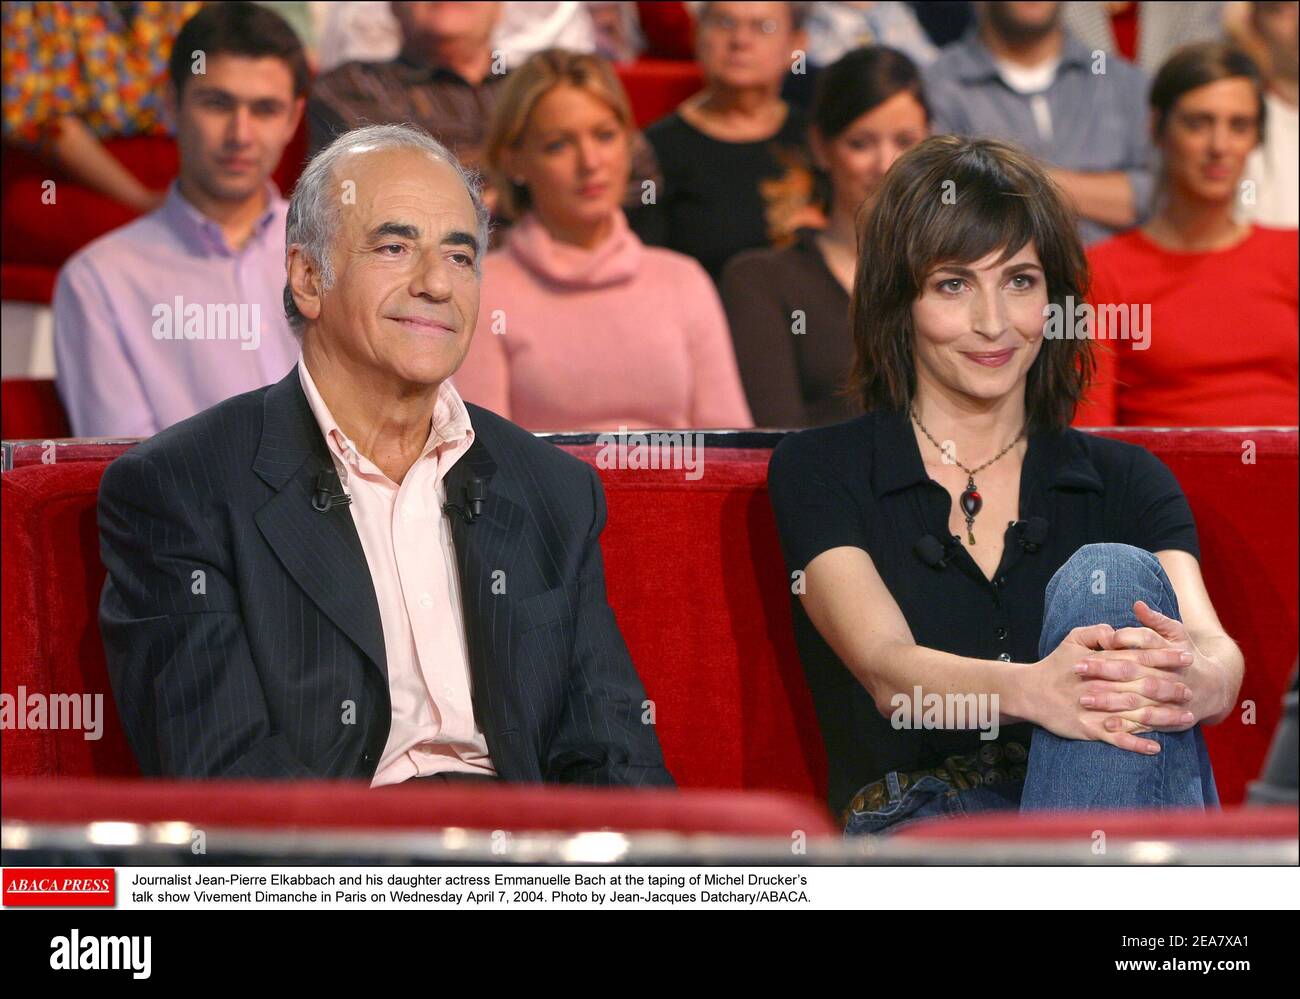 Journalist Jean-Pierre Elkabbach and his daughter actress Emmanuelle Bach  at the taping of Michel Drucker's talk show Vivement Dimanche in Paris on  Wednesday April 7, 2004. Photo by Jean-Jacques Datchary/ABACA Stock Photo -